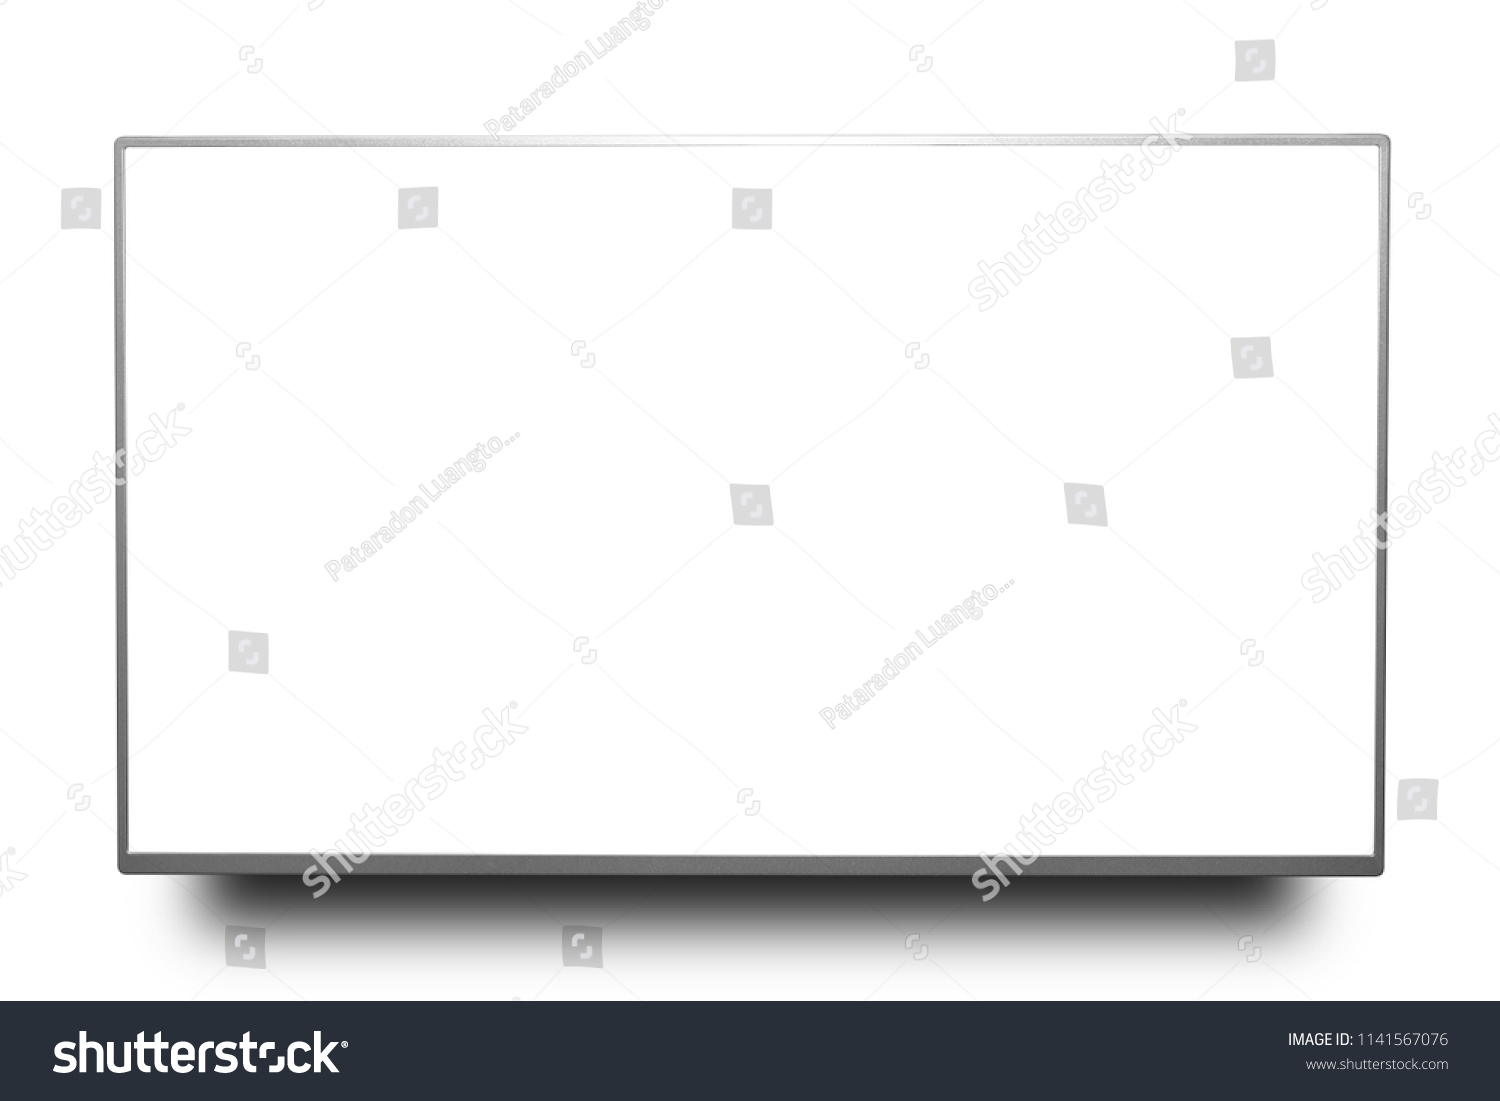 Close up silver 4k monitor or television isolated on white background with clipping path. #1141567076